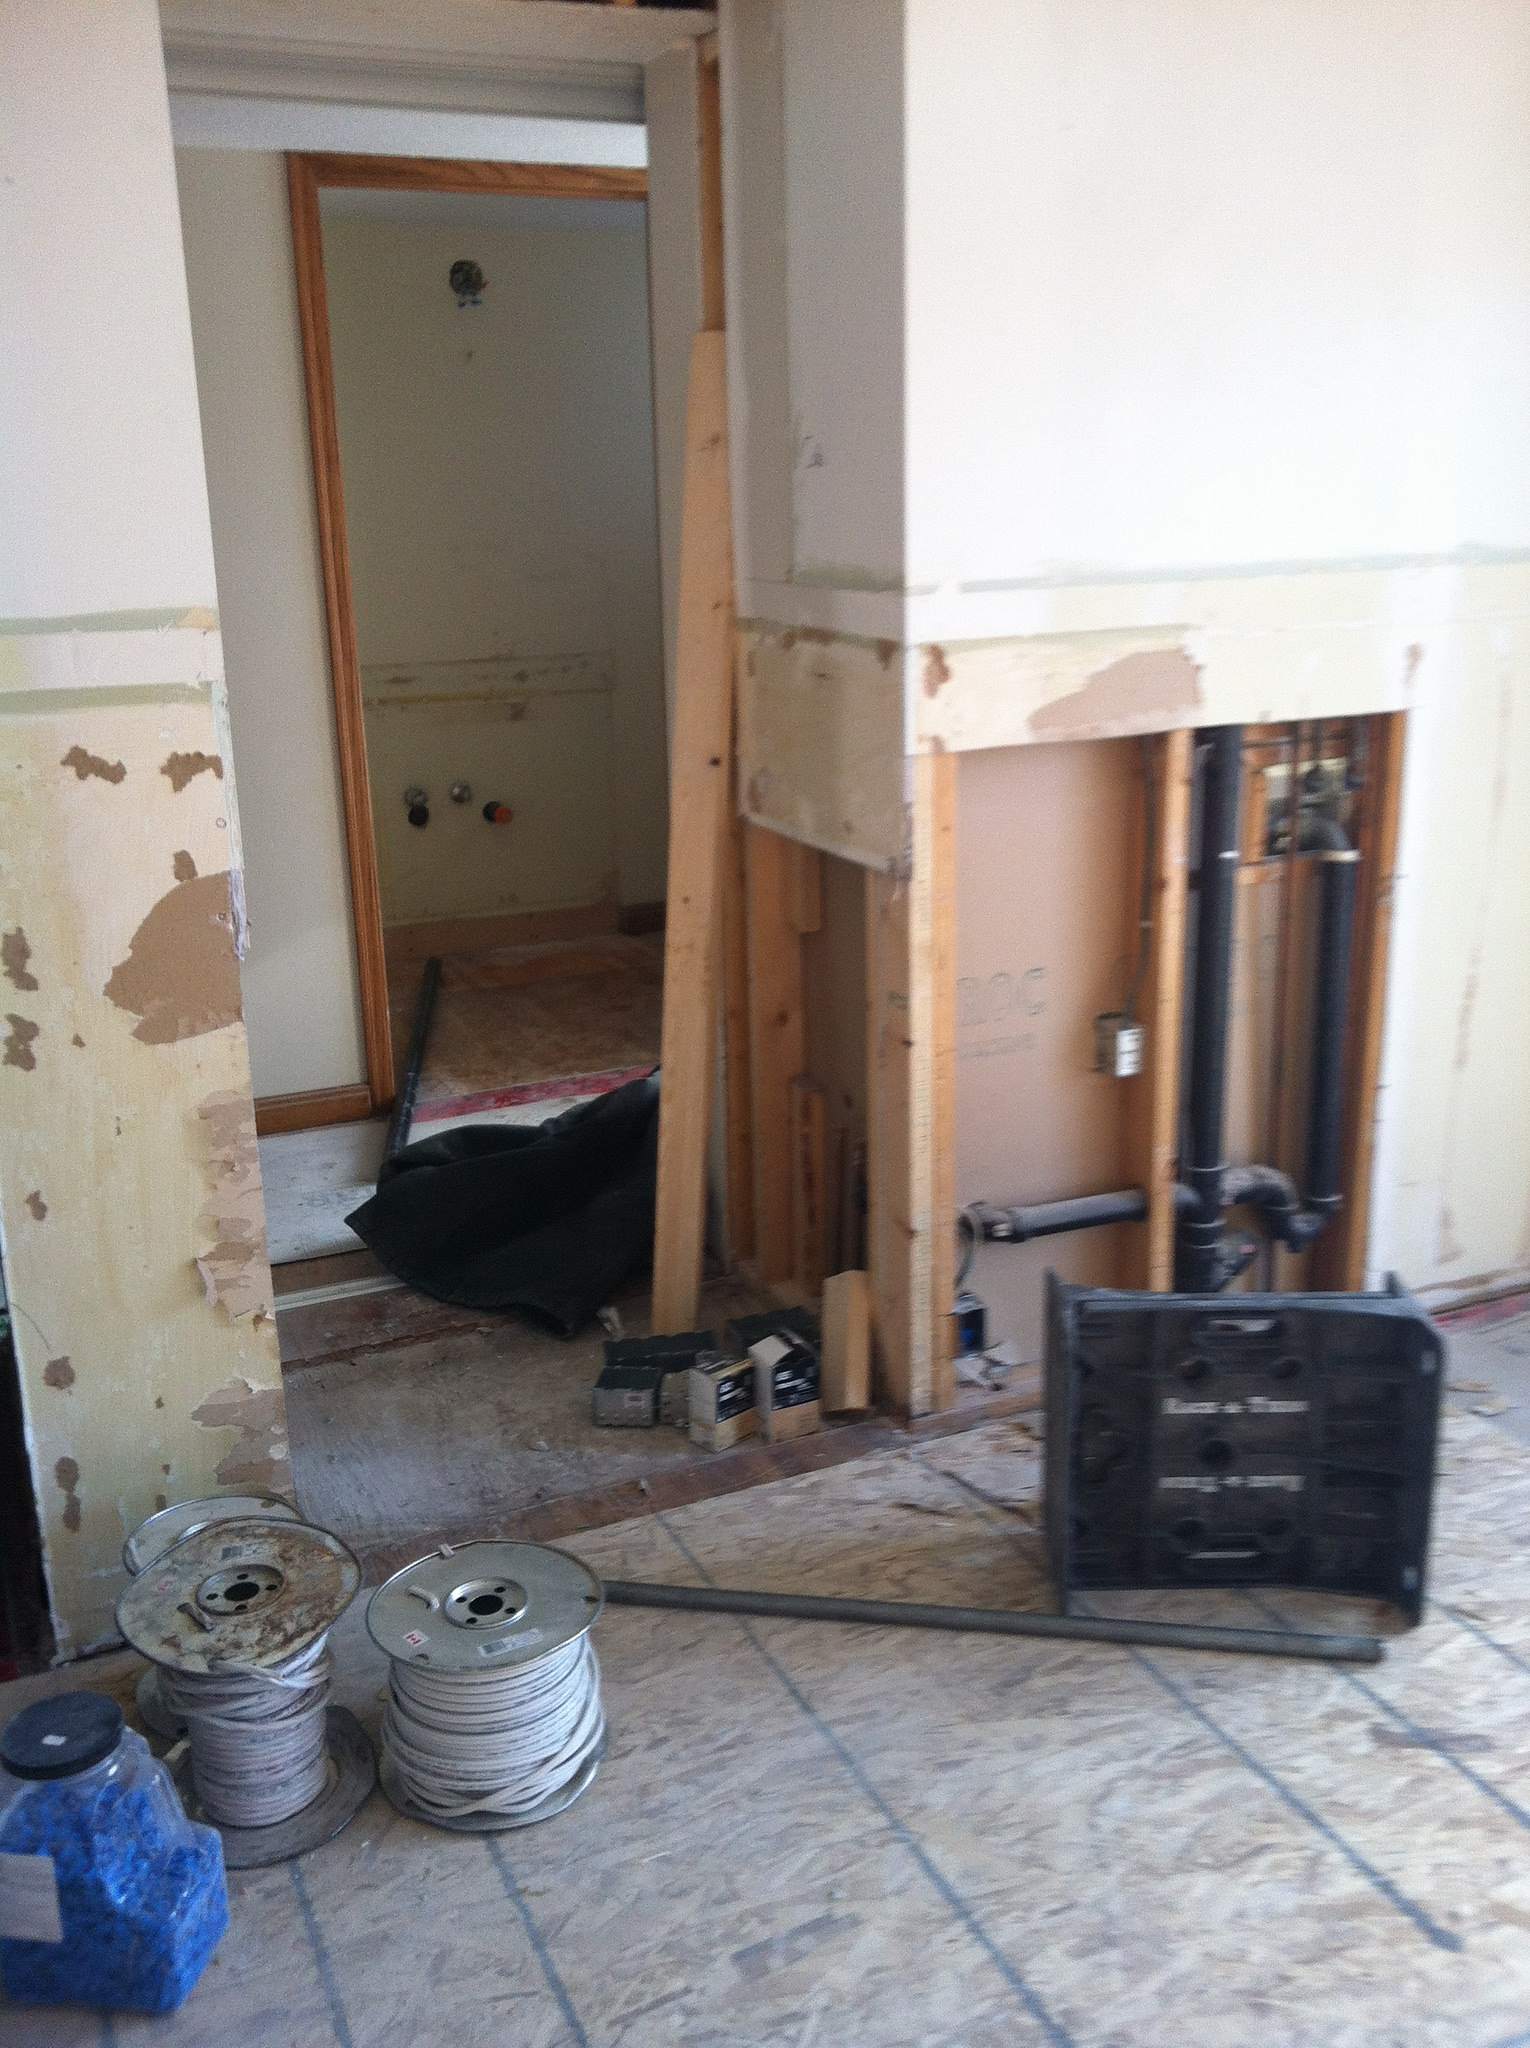 View of wet bar removed and plumbing section of wall